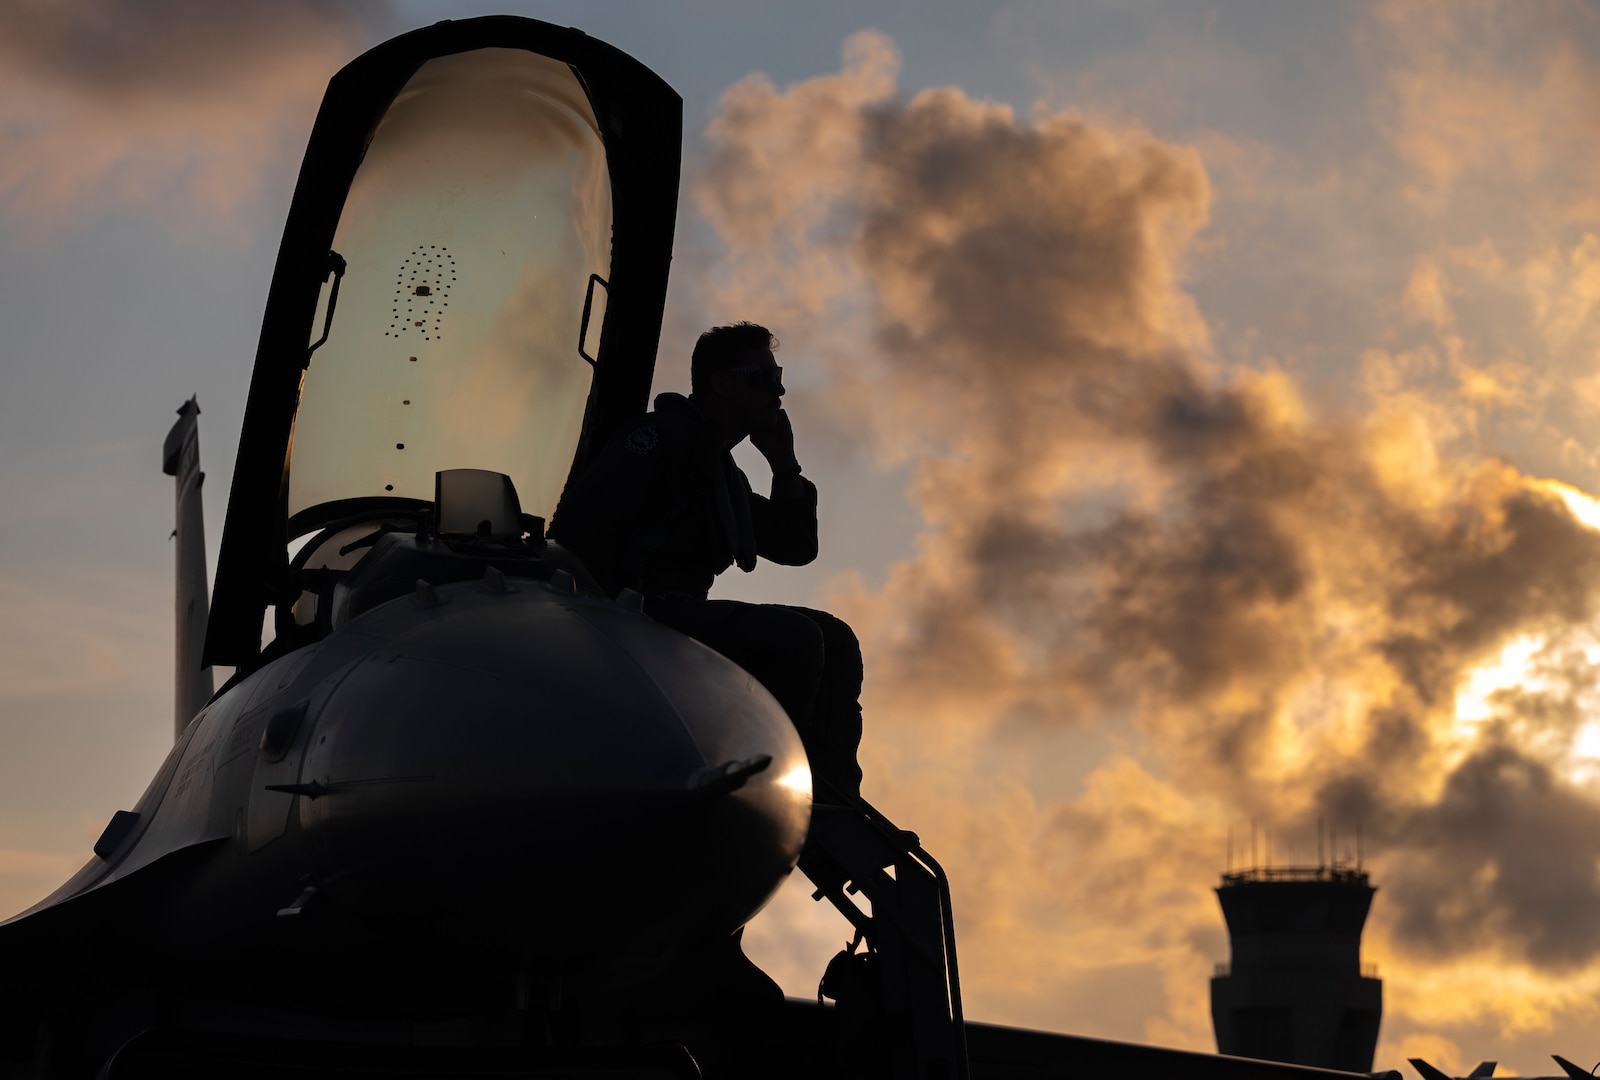 An F-16 Fighting Falcon pilot with the 93rd Fighter Squadron, Homestead Air Reserve Base, Fla., rests on the edge of the cockpit during Checkered Flag 23-2 at Tyndall Air Force Base, Fla., May 17, 2023. Eligible active-duty aviators have until Sept. 15, 2023, to apply for the fiscal year 2023 Aviation Bonus Program; Air Force officials announced the Legacy Aviation Bonus Program will open June 6, 2023. (U.S. Air Force photo by Senior Airman Tiffany Del Oso)